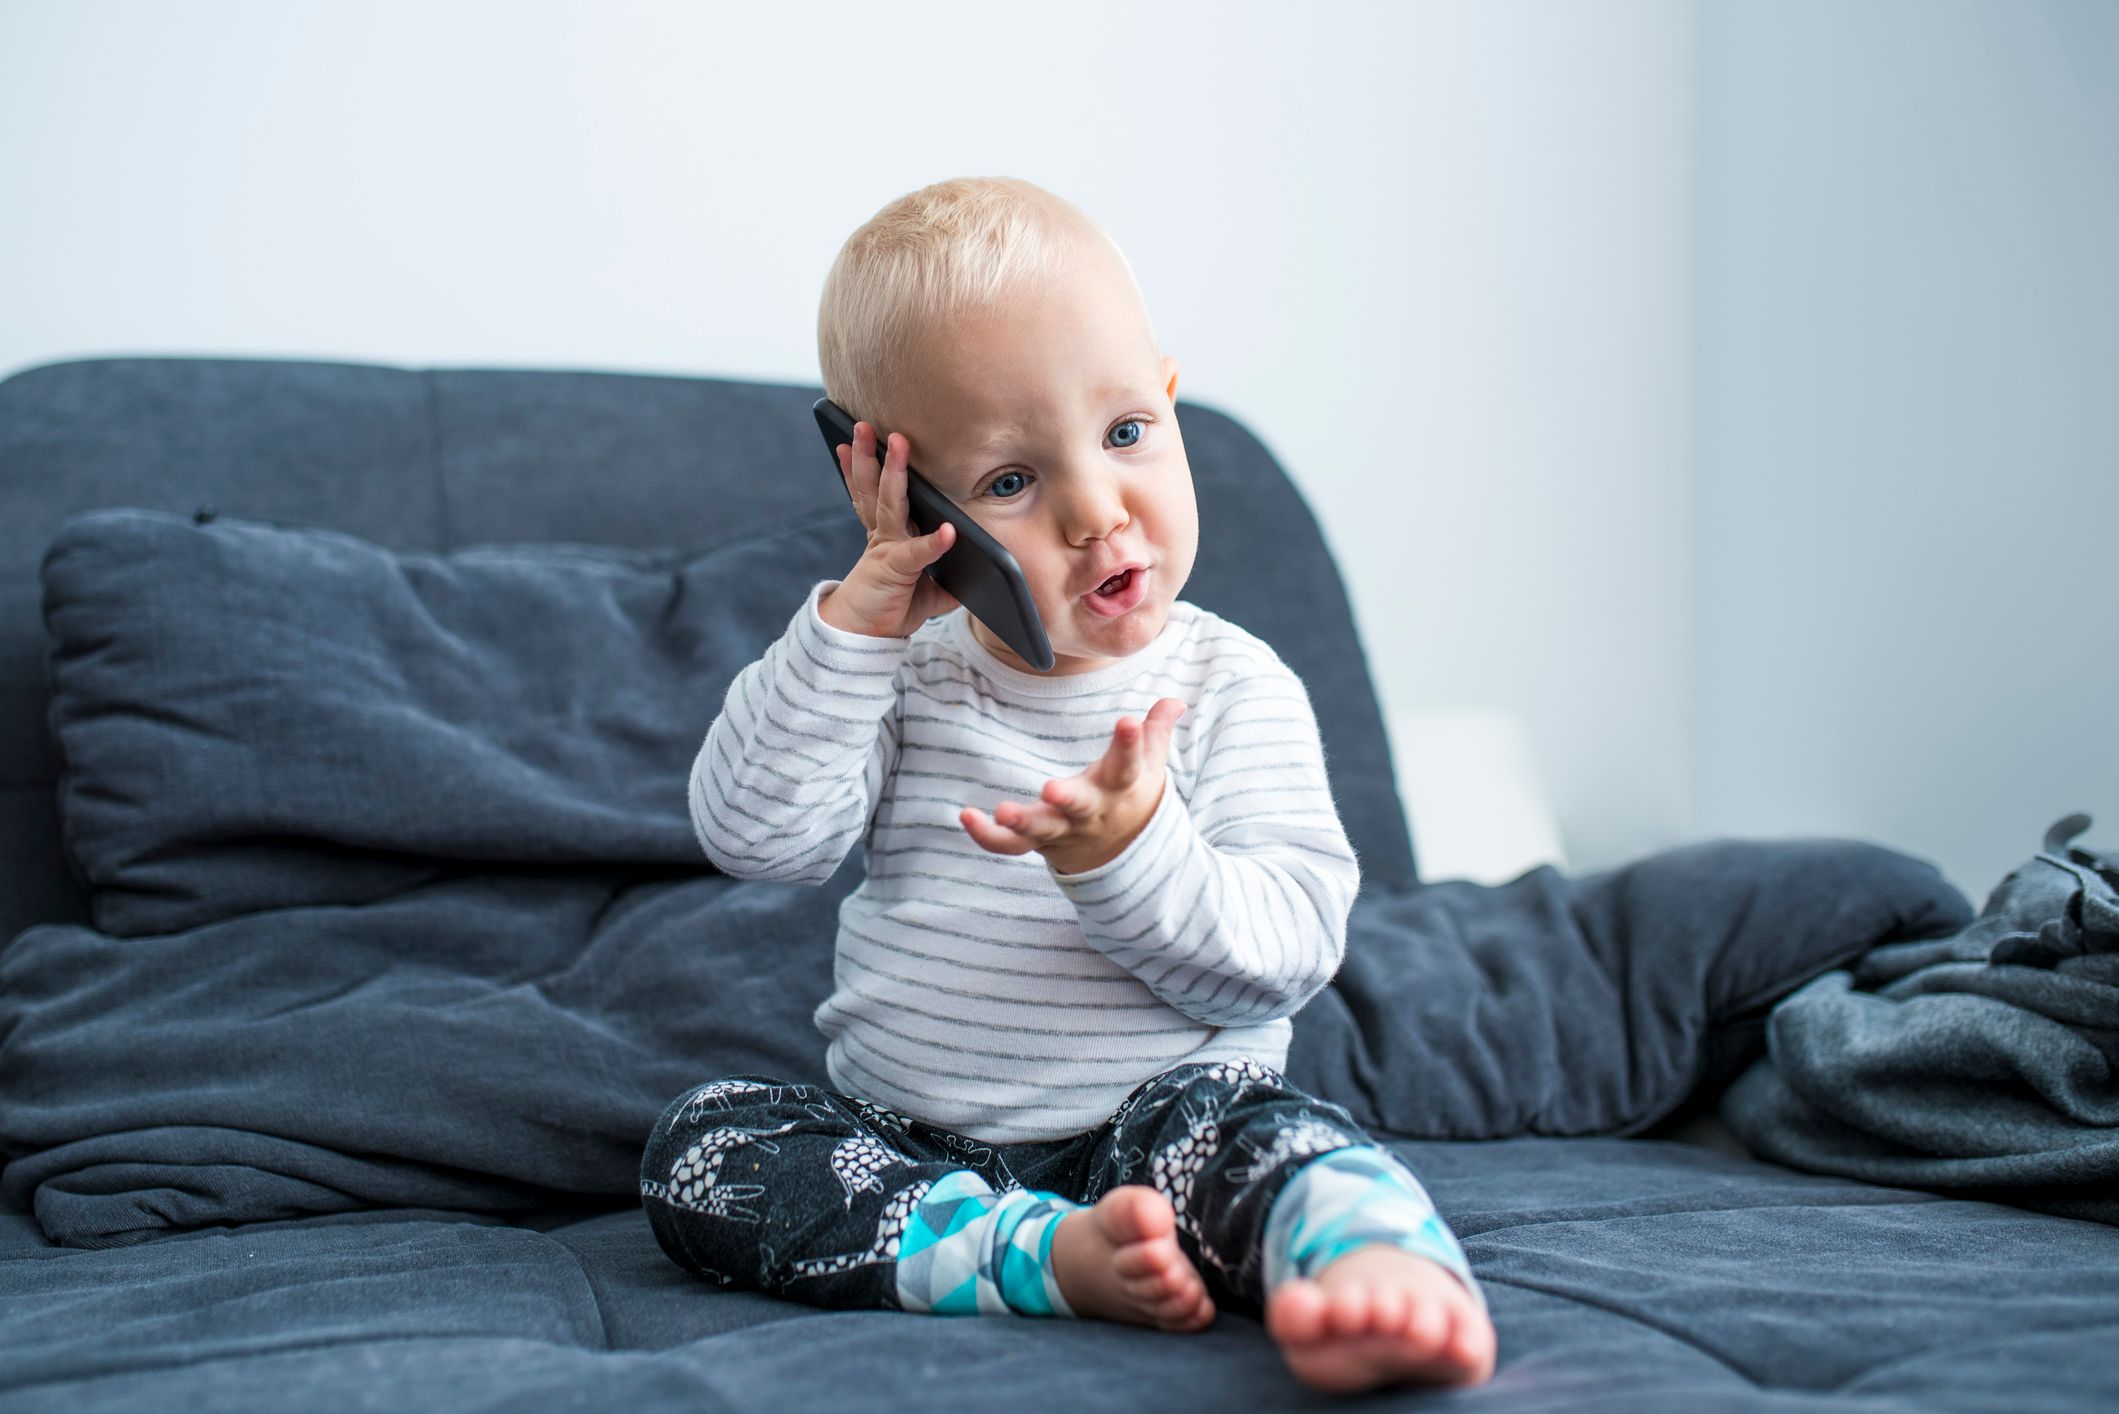 A toddler talks on the phone while in bed. | Source: Getty Images